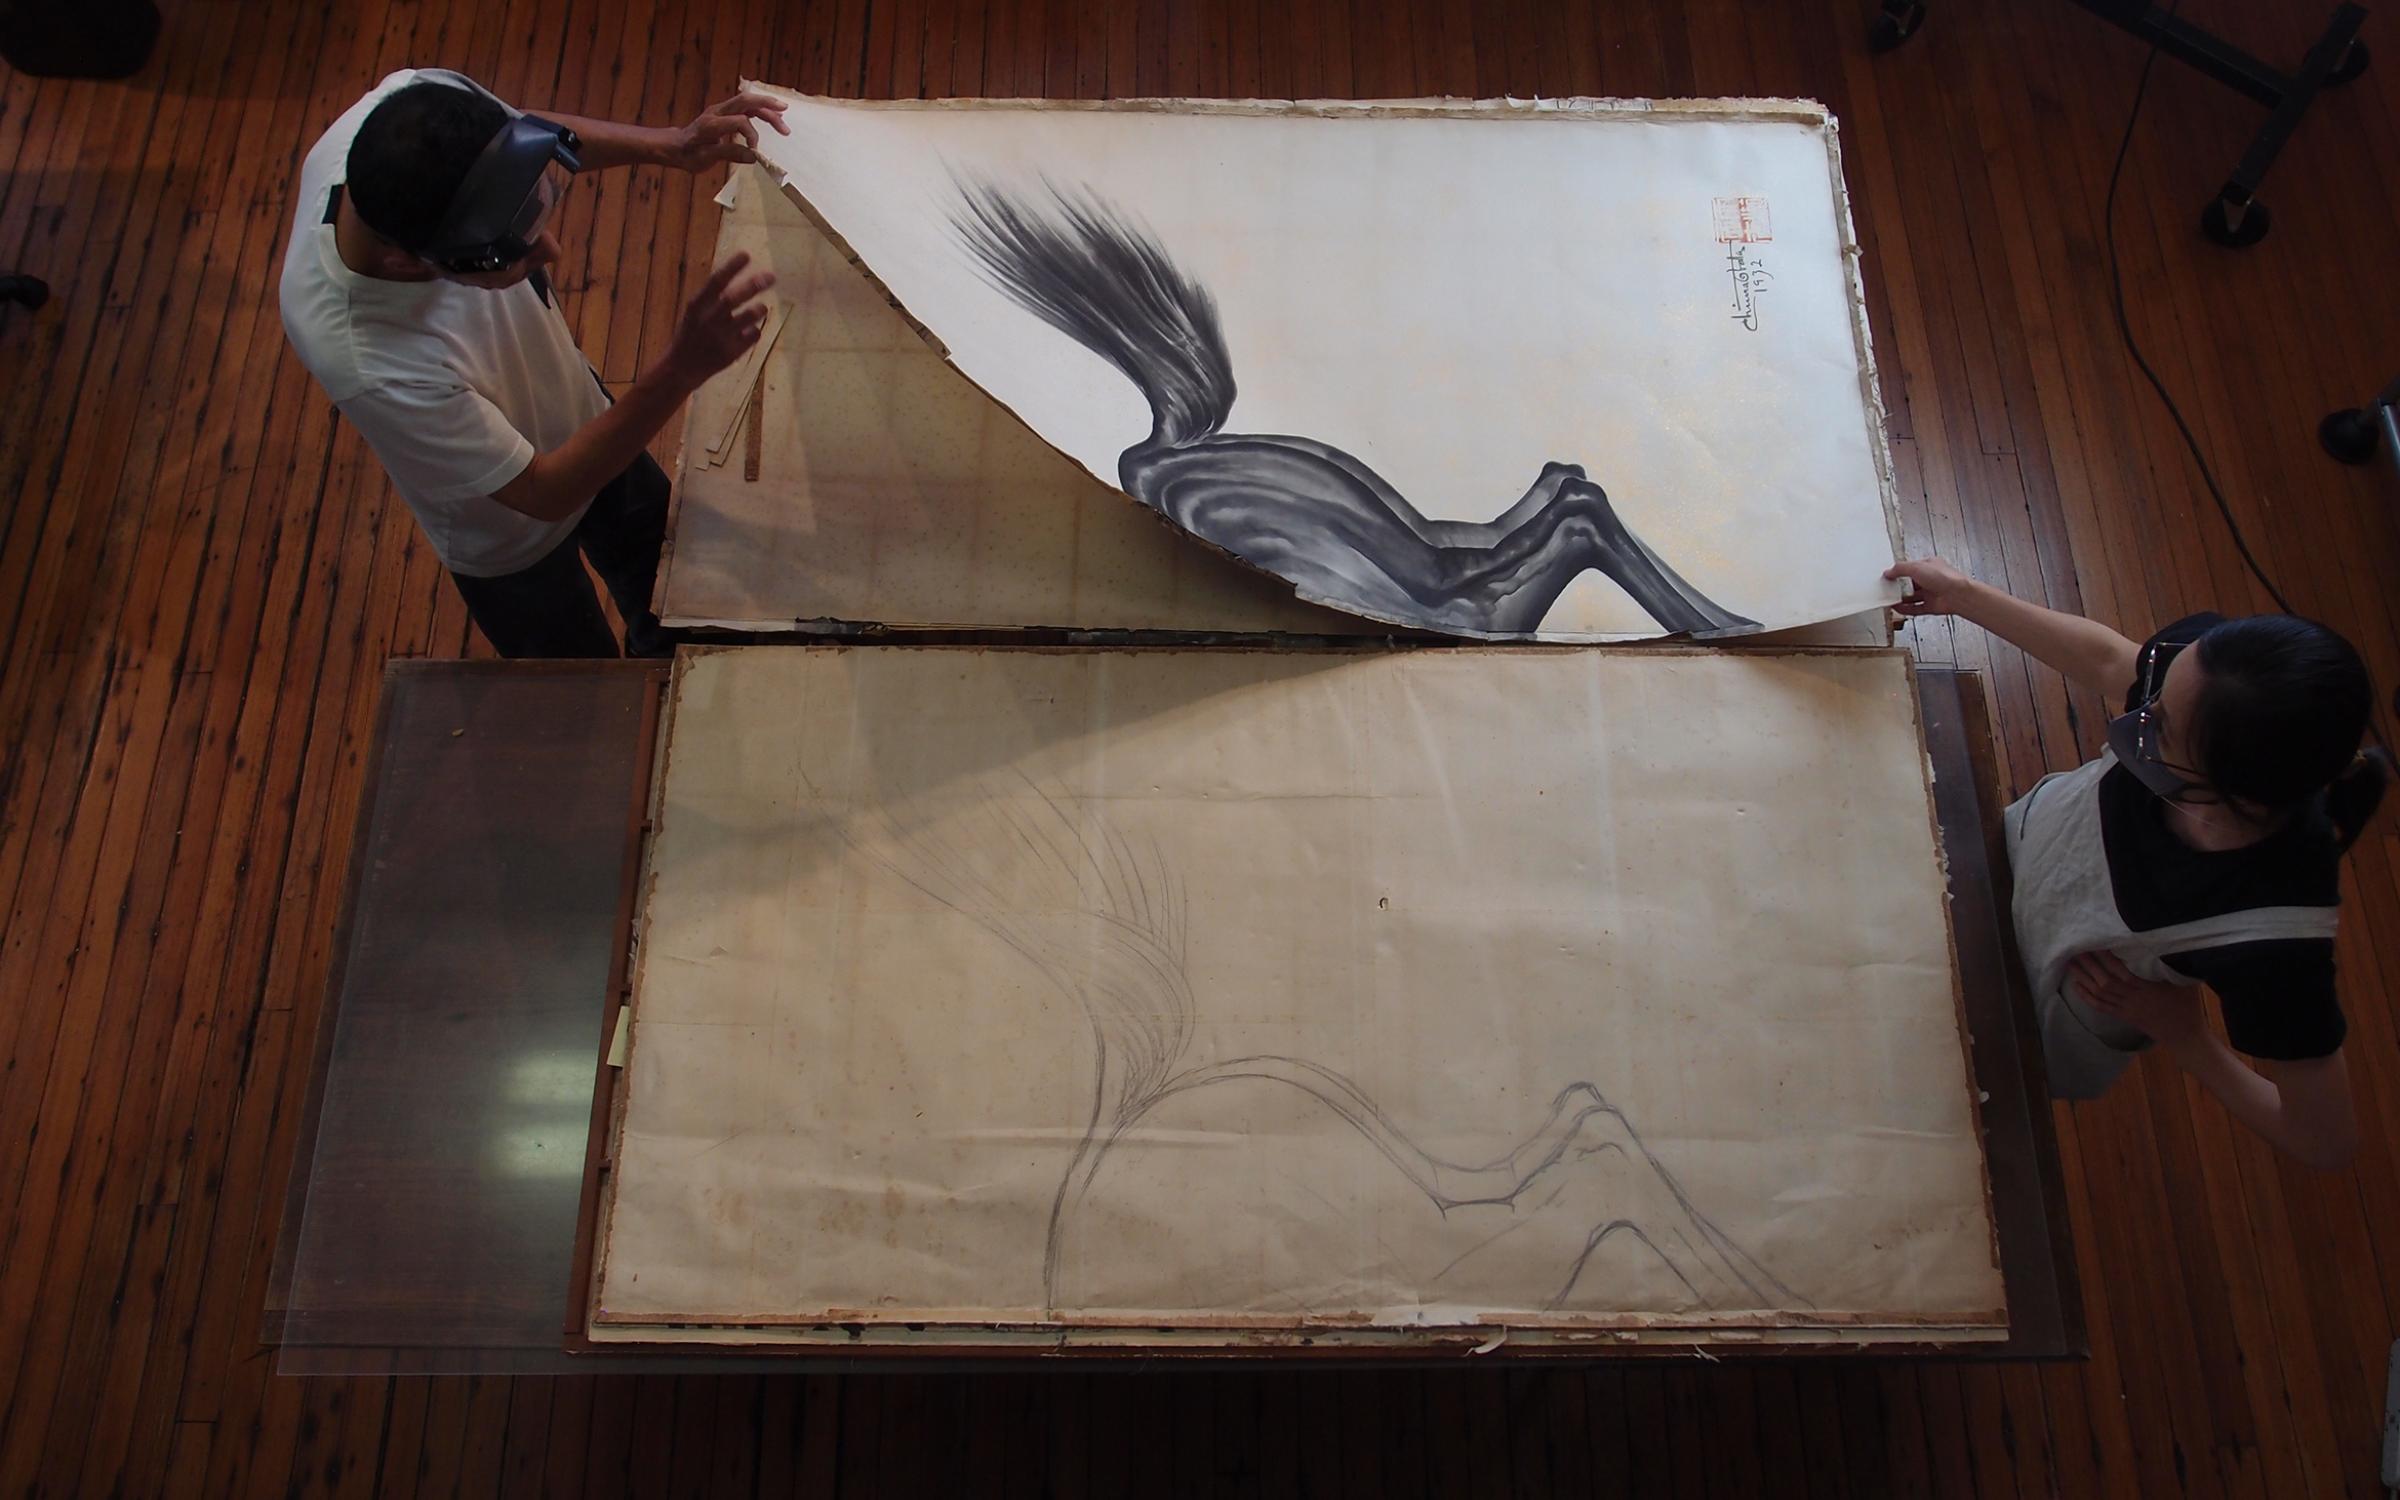 Two people stand on either side of a large table, handling large pieces of paper with a painting of the back end of a black horse.